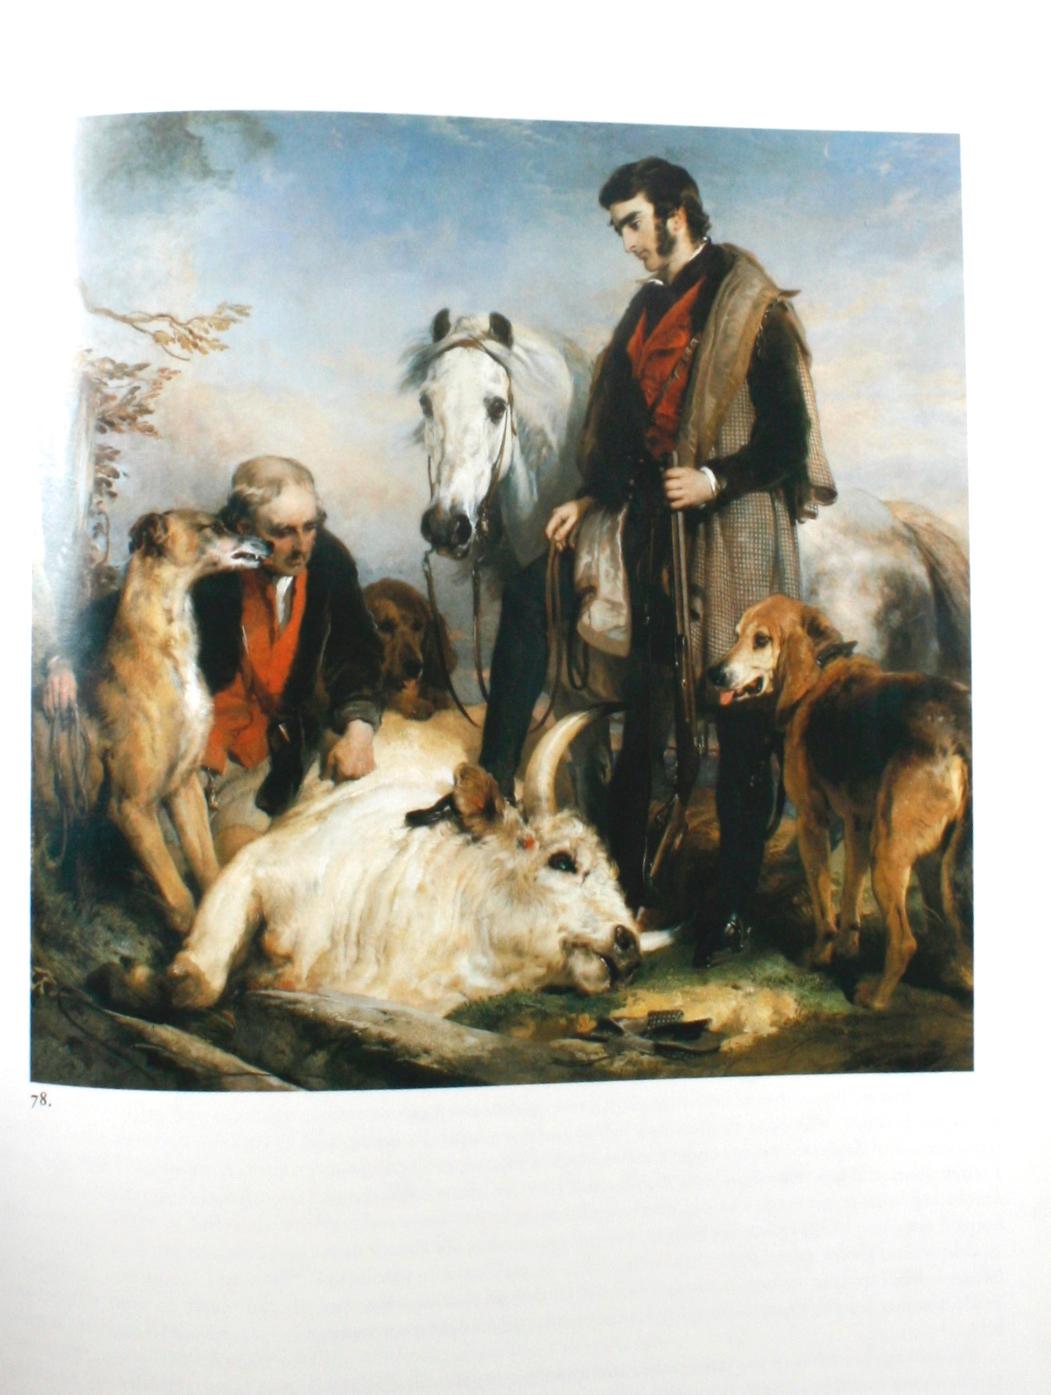 Sir Edwin Landseer by Richard Ormond. Philadelphia: Philadelphia Museum of Art, 1981. Softcover. 223 pp. Exhibition catalogue from the Philadelphia Museum of Art and The Tate Gallery, London of the works of Richard Ormond held from October 1981 to